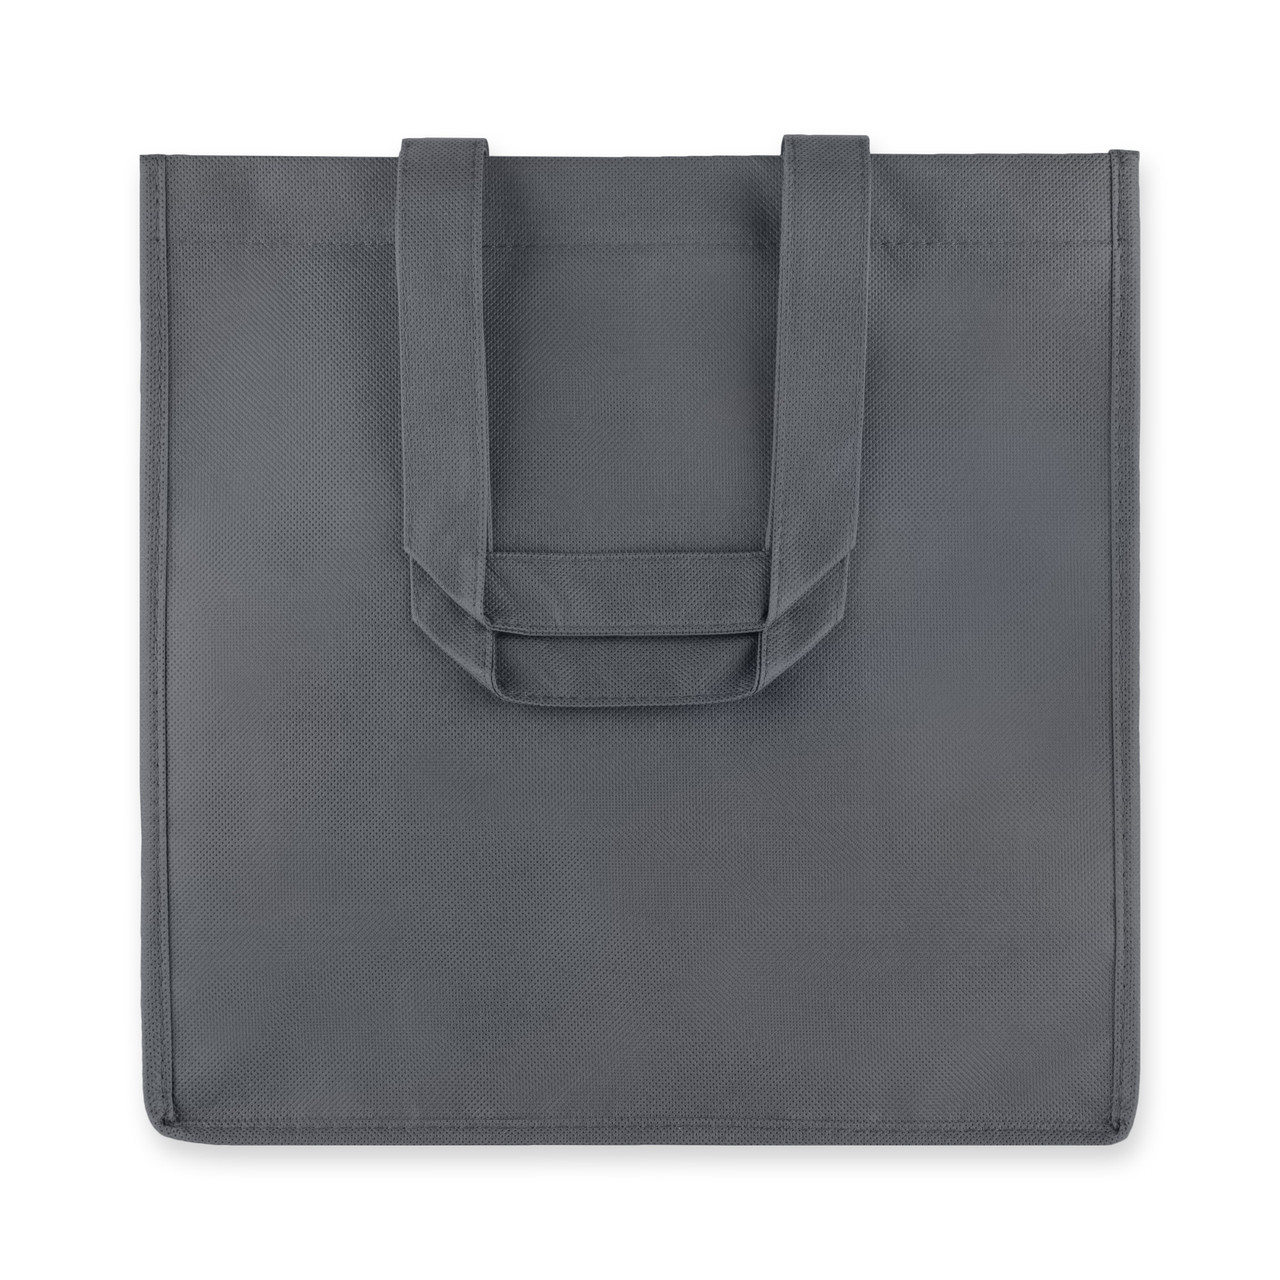 6 Bottle Grey Non Woven Tote by True